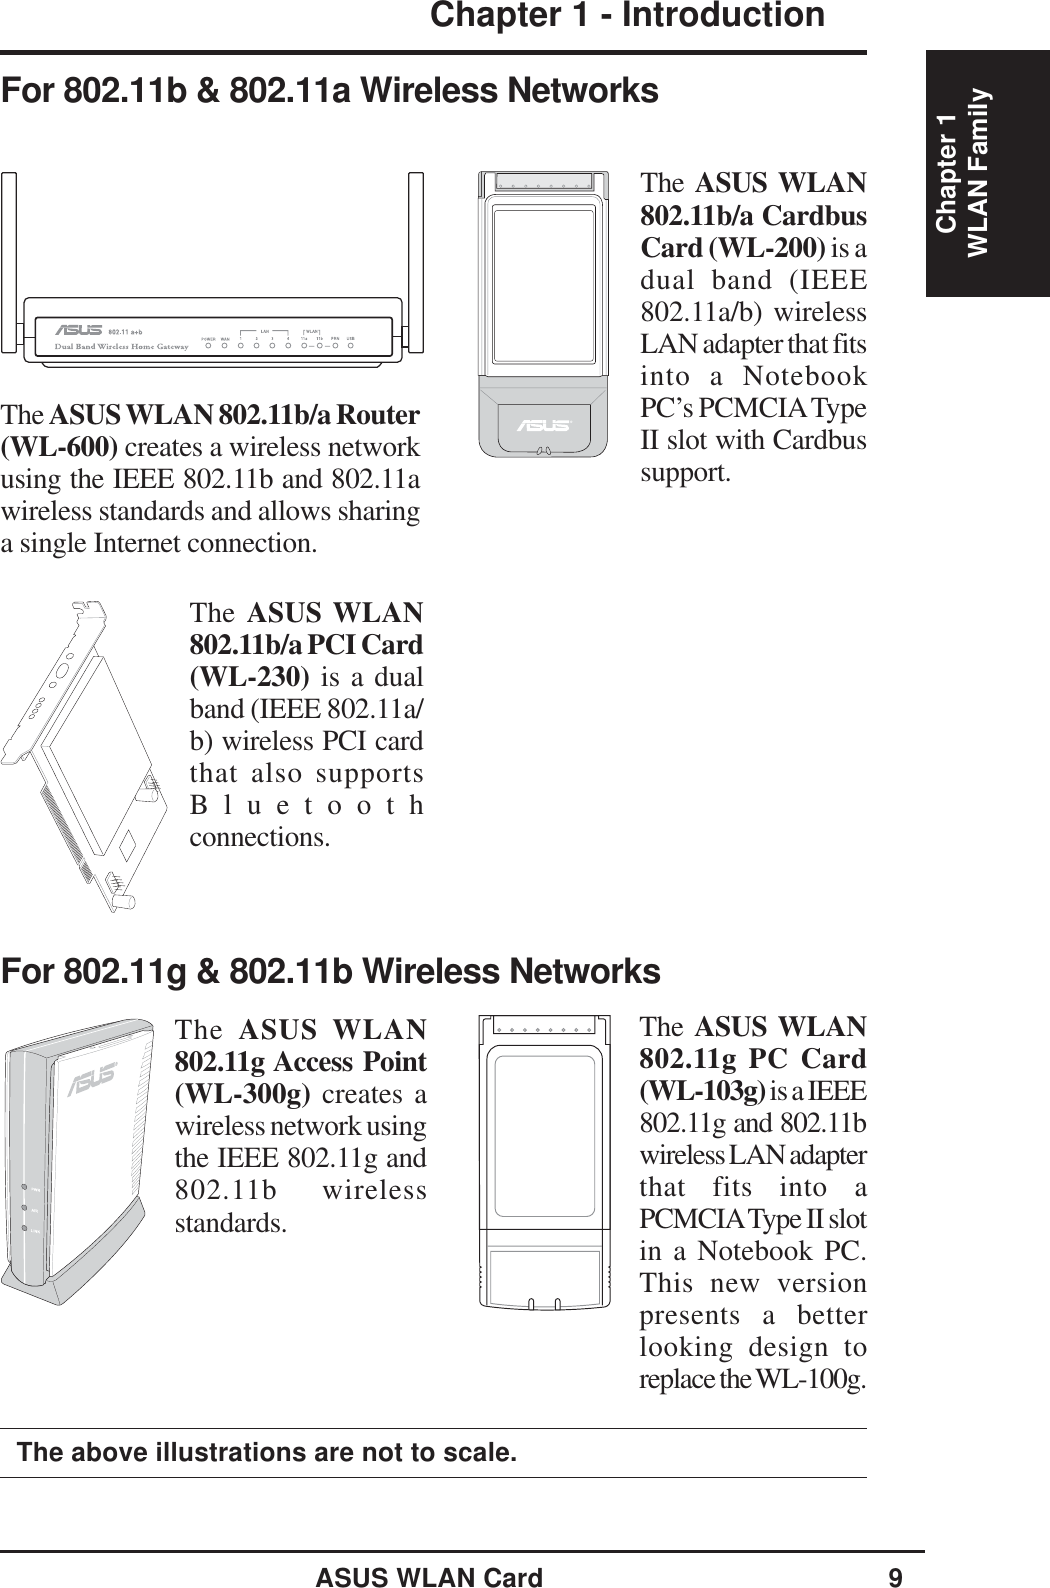 ASUS WLAN Card 9Chapter 1 - IntroductionChapter 1WLAN FamilyThe above illustrations are not to scale.The ASUS WLAN 802.11b/a Router(WL-600) creates a wireless networkusing the IEEE 802.11b and 802.11awireless standards and allows sharinga single Internet connection.The ASUS WLAN802.11b/a CardbusCard (WL-200) is adual band (IEEE802.11a/b) wirelessLAN adapter that fitsinto a NotebookPC’s PCMCIA TypeII slot with Cardbussupport.The ASUS WLAN802.11b/a PCI Card(WL-230) is a dualband (IEEE 802.11a/b) wireless PCI cardthat also supportsBluetoothconnections.For 802.11b &amp; 802.11a Wireless NetworksThe  ASUS WLAN802.11g Access Point(WL-300g) creates awireless network usingthe IEEE 802.11g and802.11b wirelessstandards.For 802.11g &amp; 802.11b Wireless NetworksThe ASUS WLAN802.11g PC Card(WL-103g) is a IEEE802.11g and 802.11bwireless LAN adapterthat fits into aPCMCIA Type II slotin a Notebook PC.This new versionpresents a betterlooking design toreplace the WL-100g.